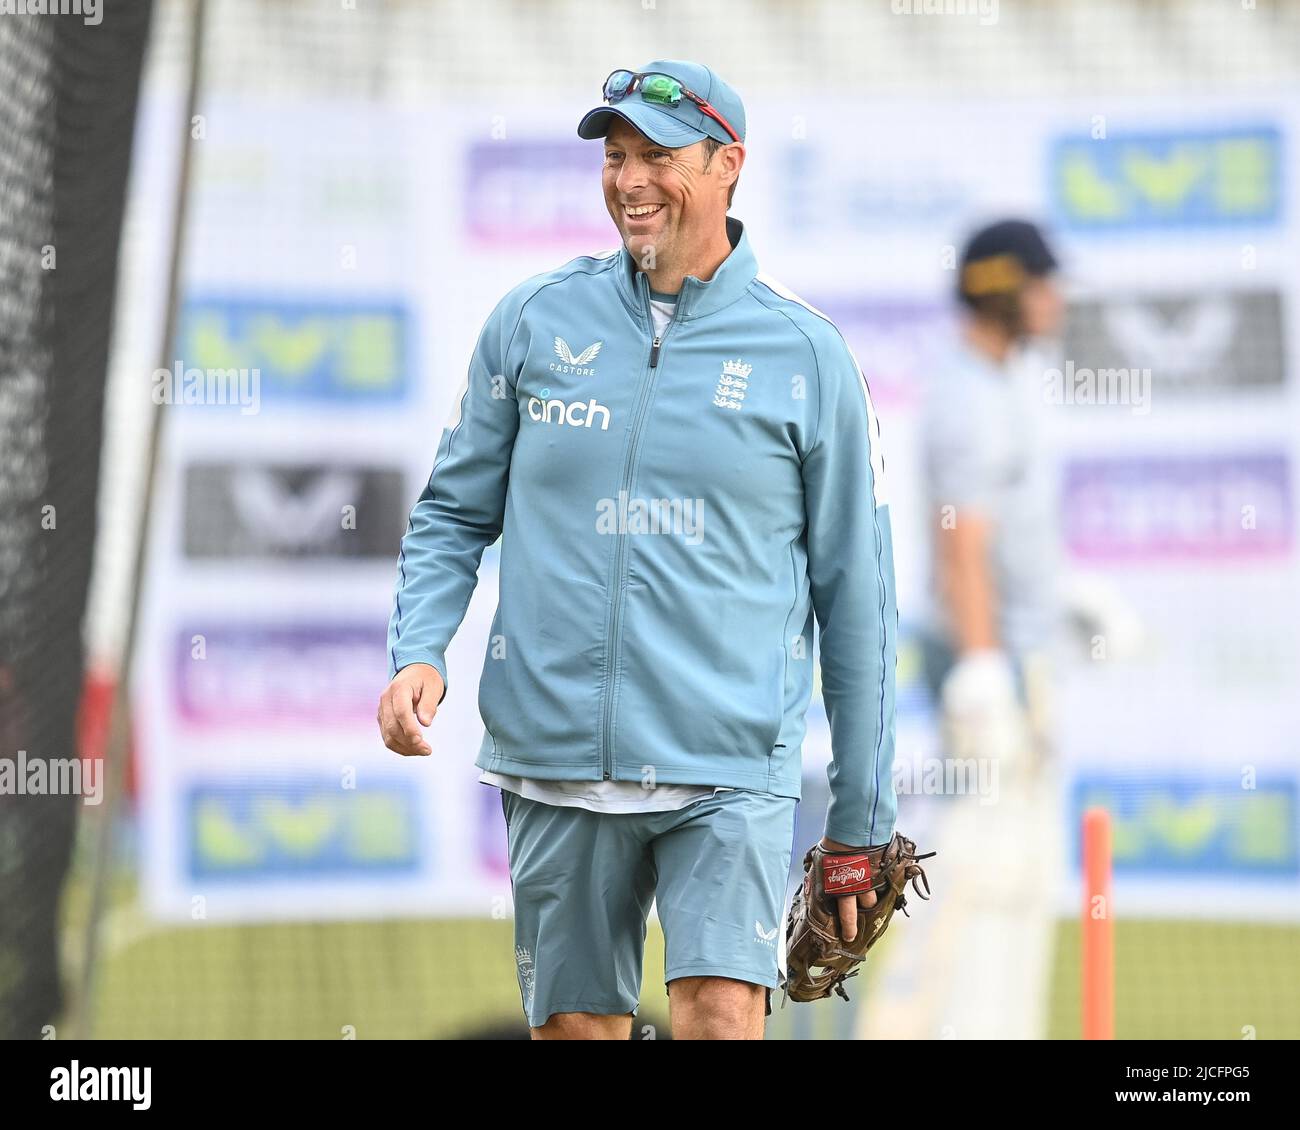 Nottingham, UK. 13th June, 2022. Marcus Trescothick of England during the warmup session in Nottingham, United Kingdom on 6/13/2022. (Photo by Craig Thomas/News Images/Sipa USA) Credit: Sipa USA/Alamy Live News Stock Photo